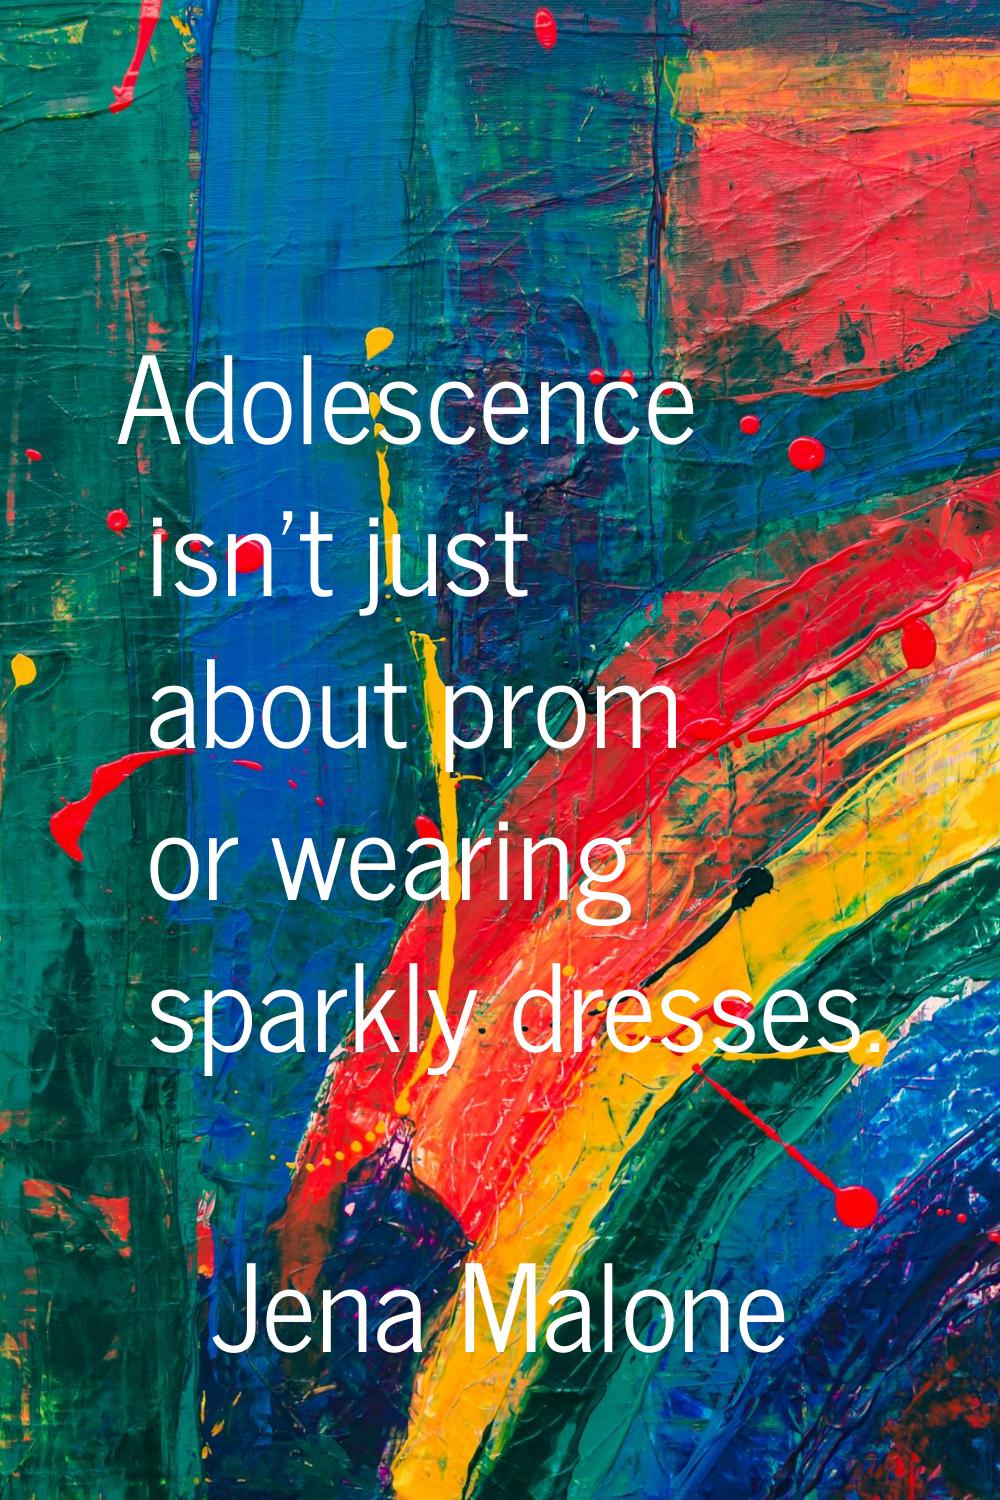 Adolescence isn't just about prom or wearing sparkly dresses.